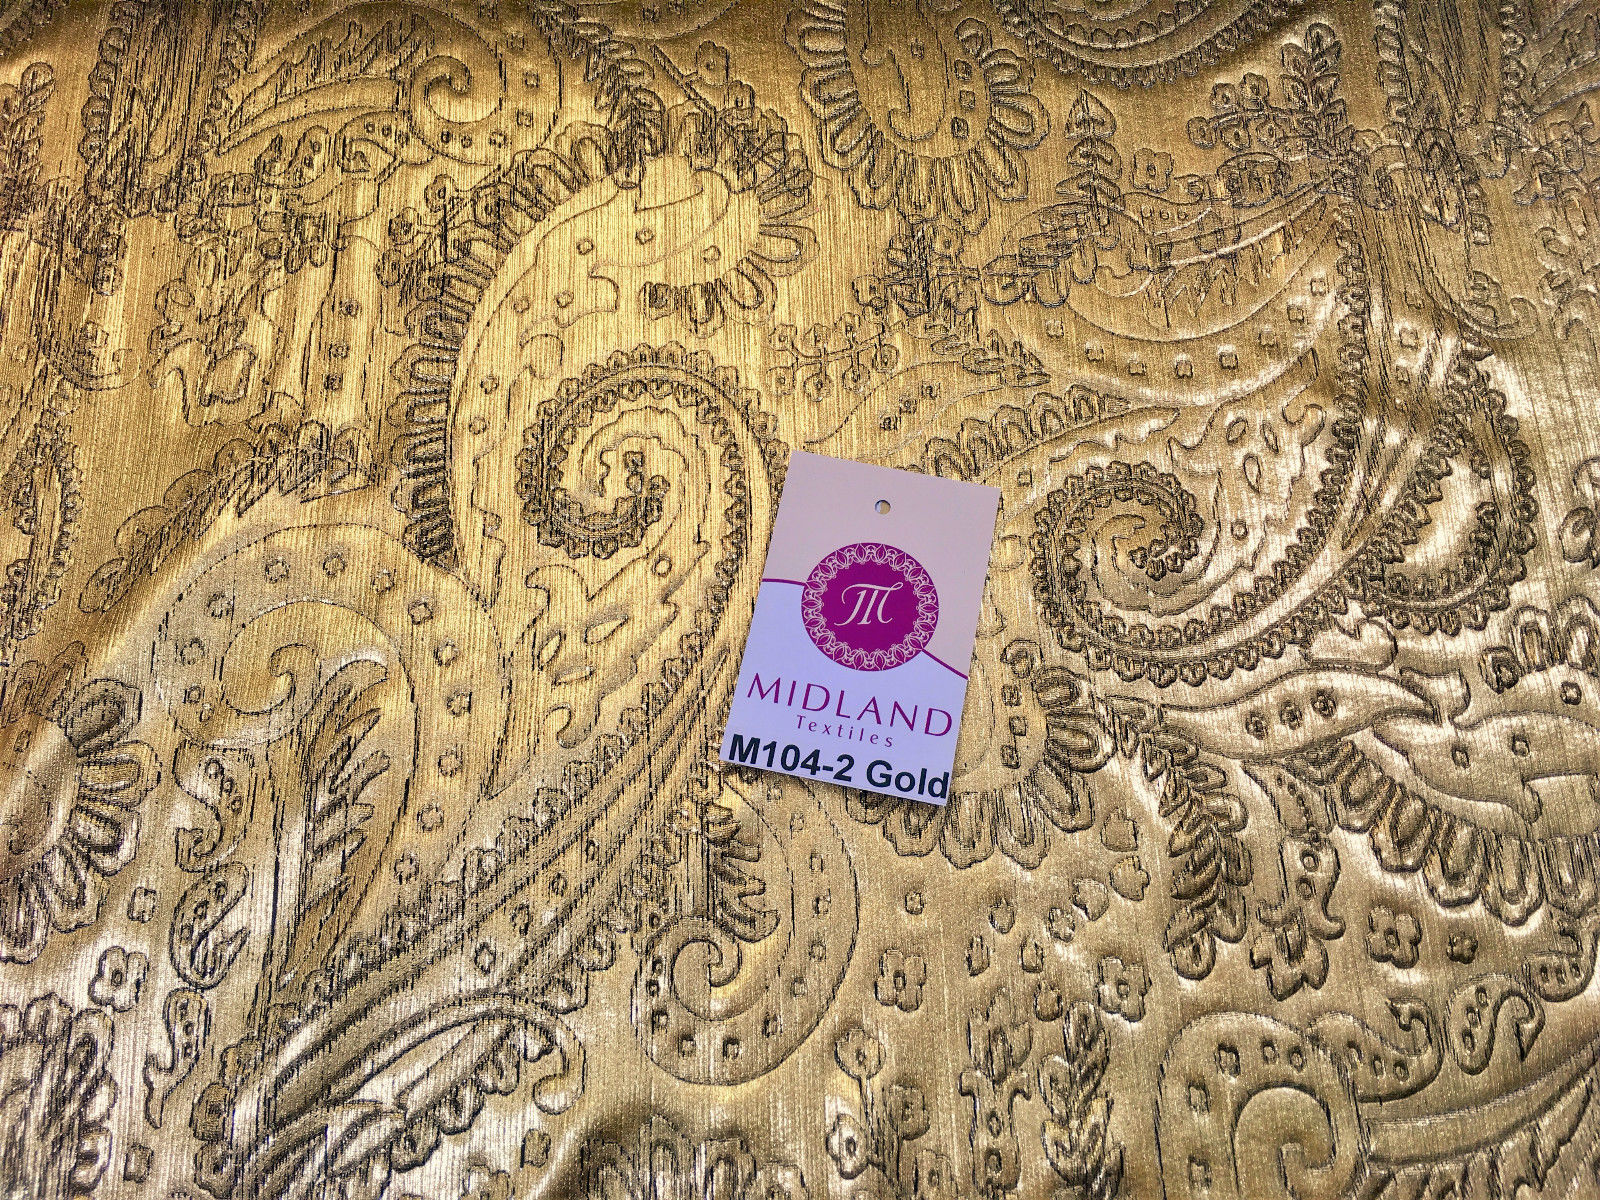 Lame Paisley Embossed Foil 1 way stretch Fabric 58" wide M104 Mtex